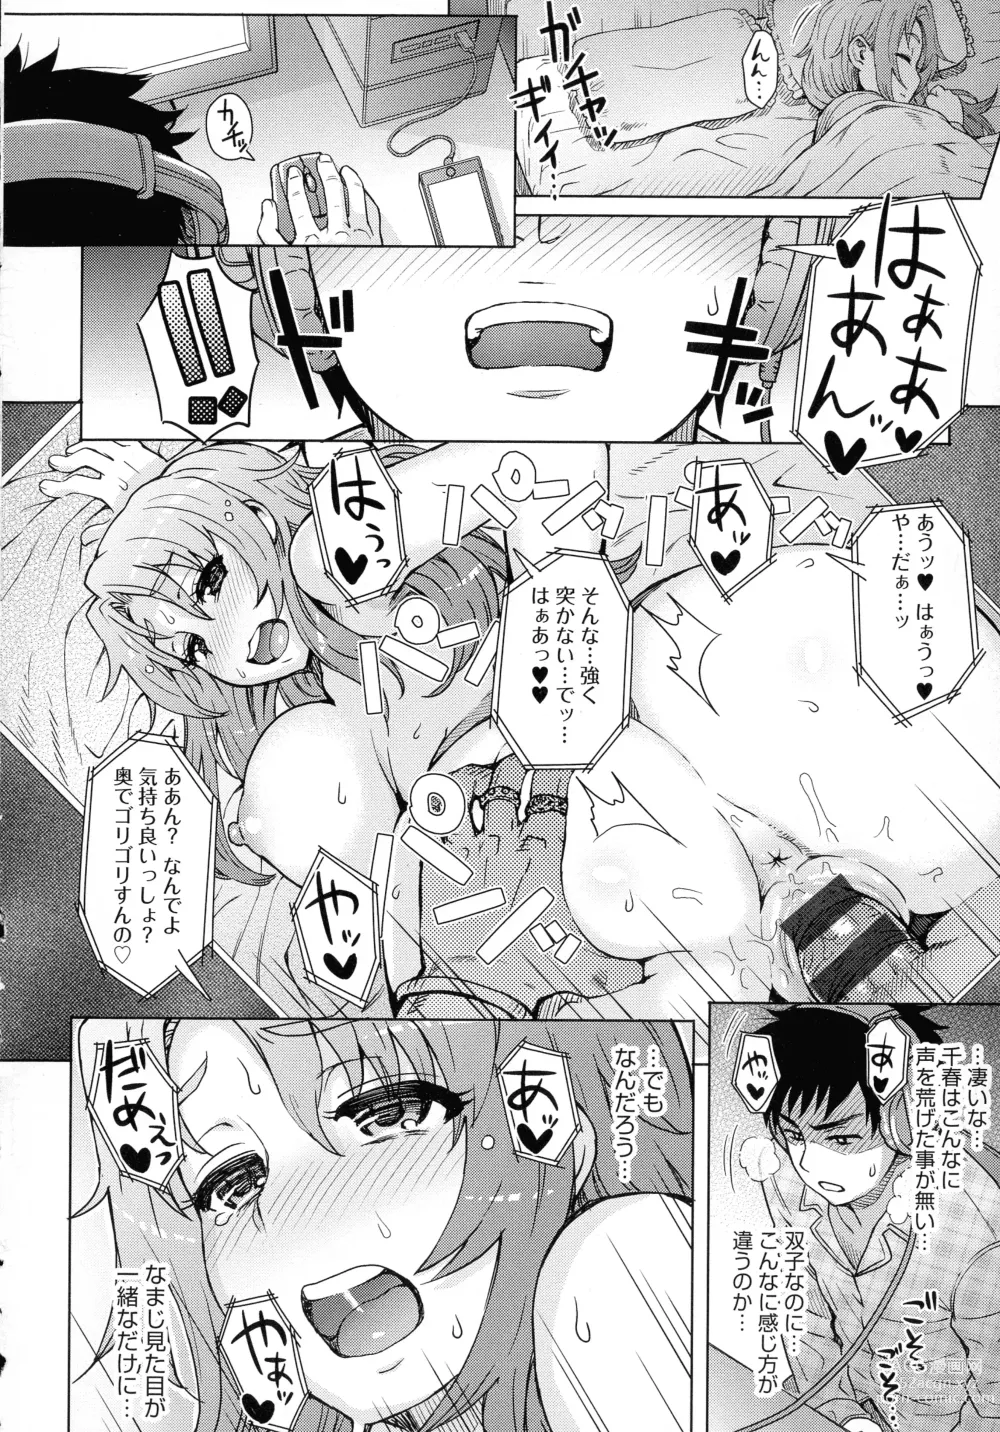 Page 6 of doujinshi Shared Love